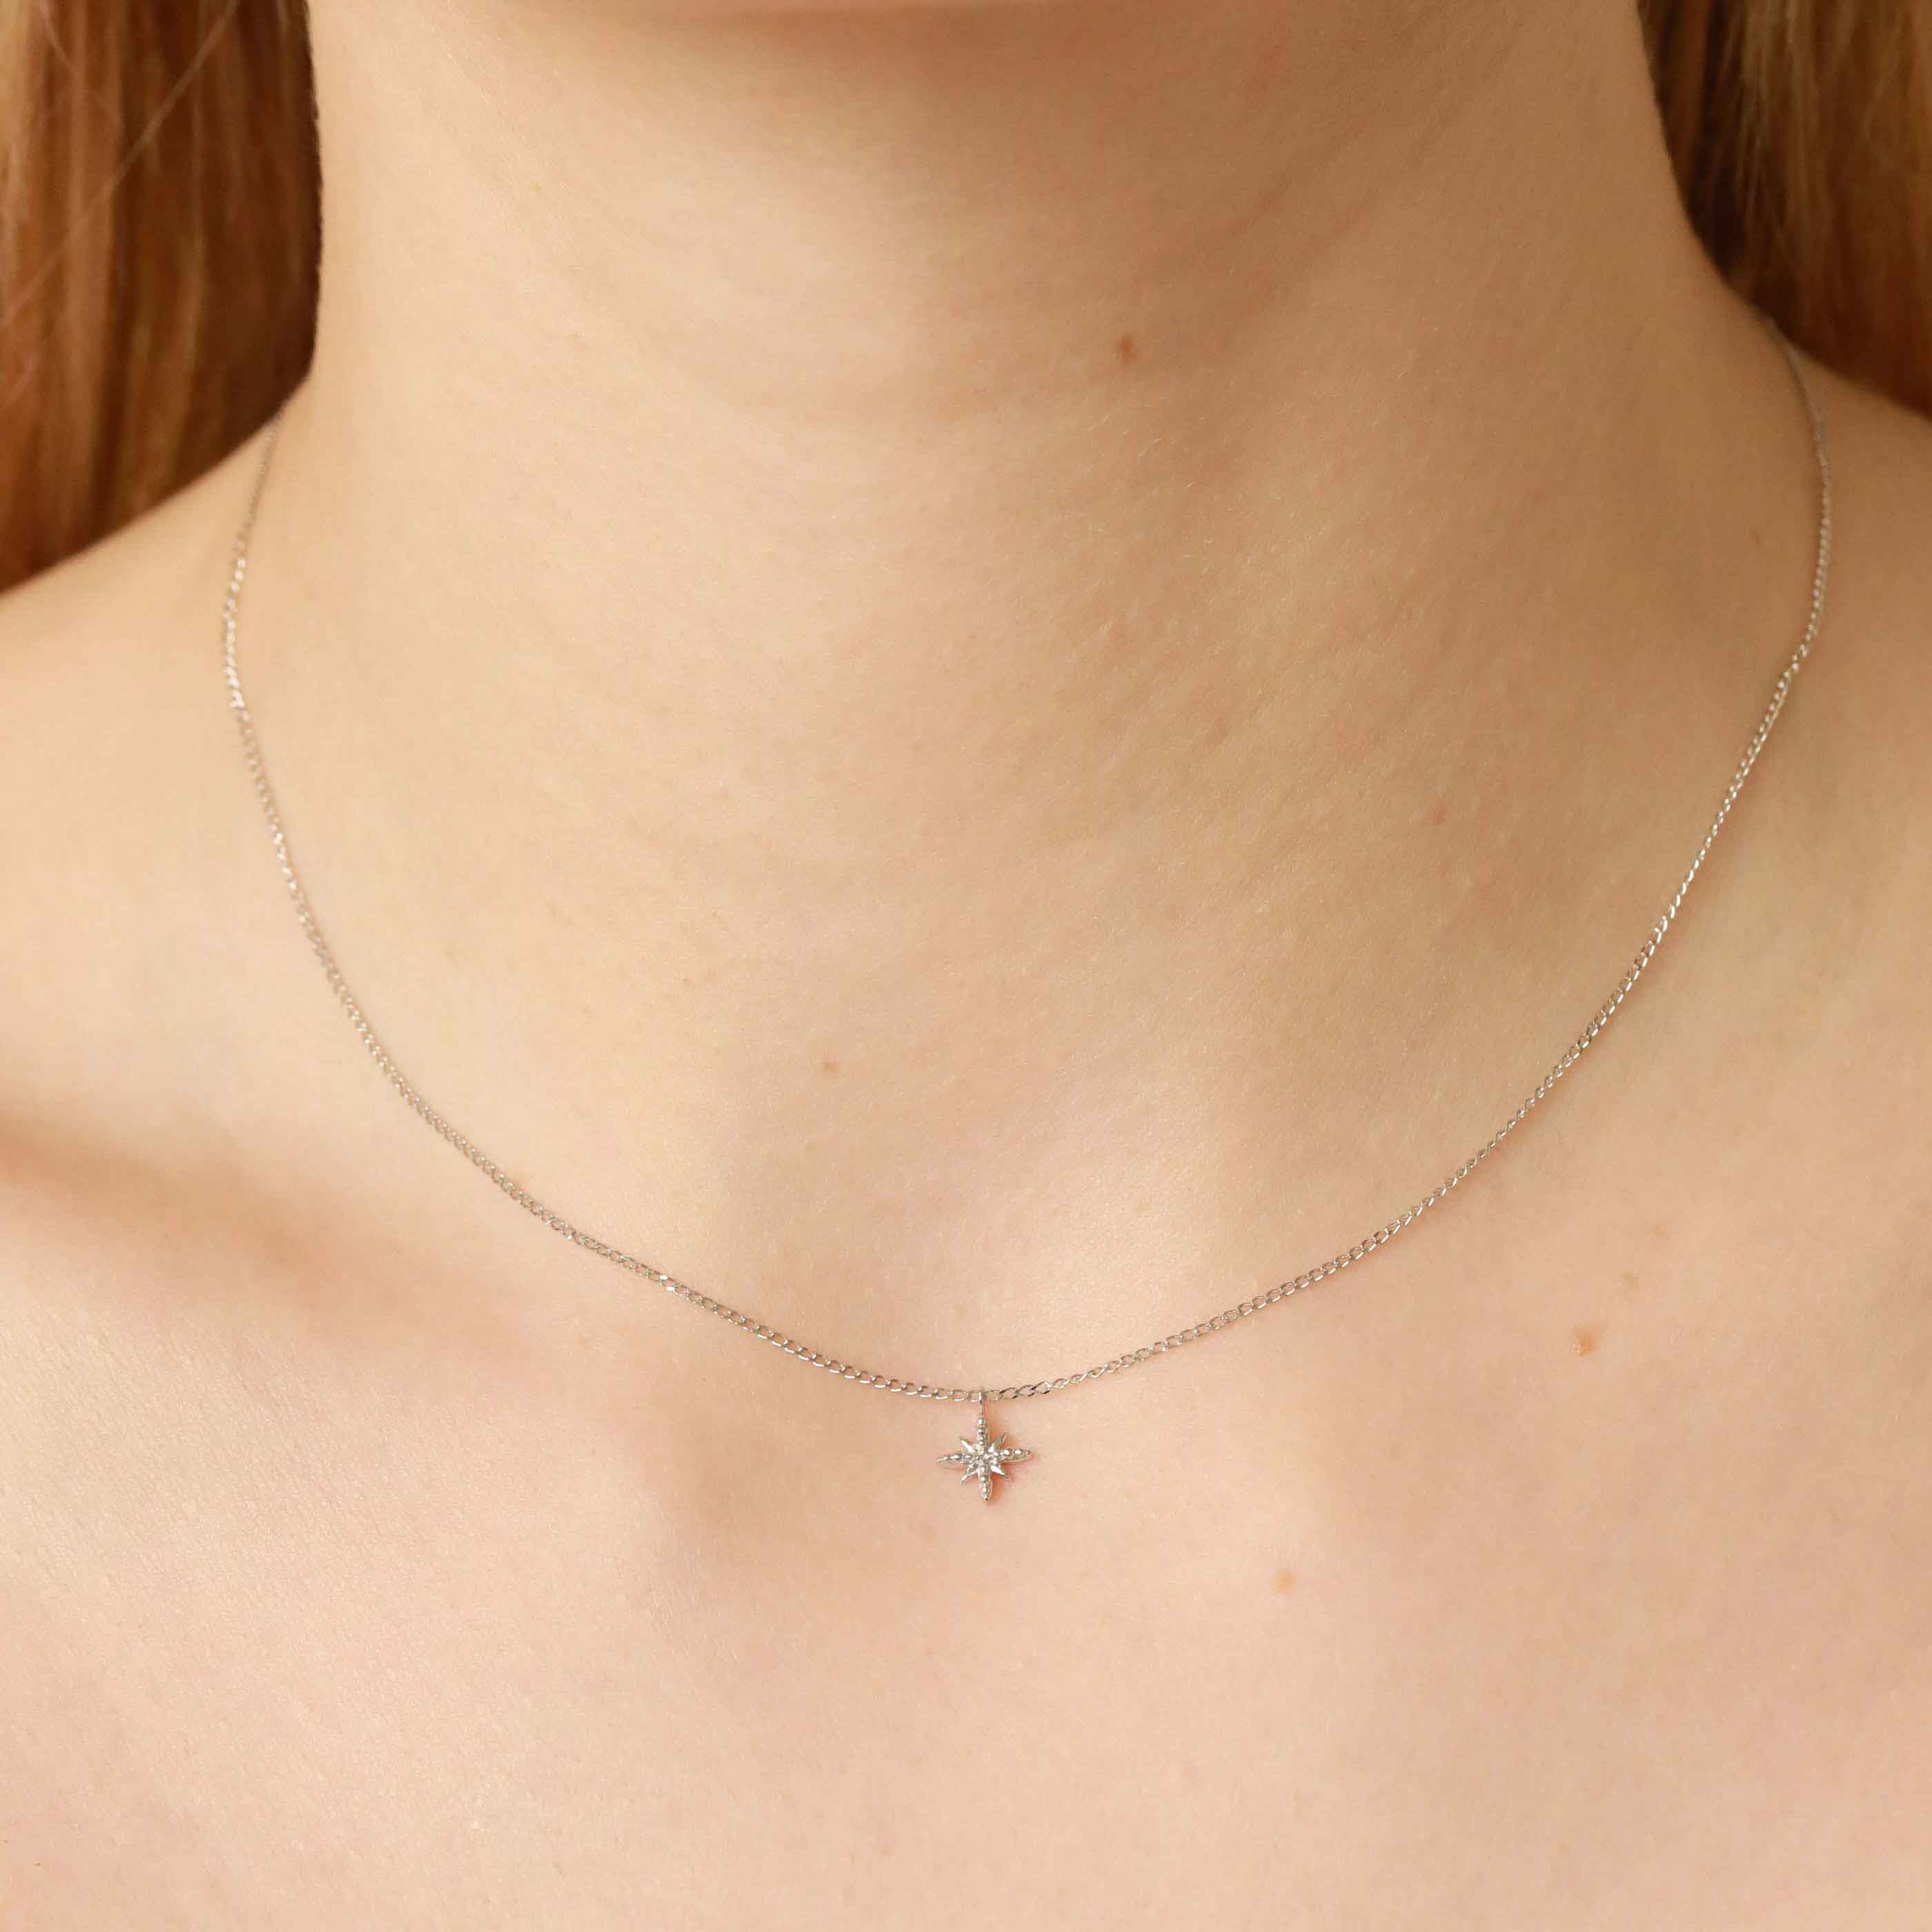 Twilight Pendant Necklace in Solid White Gold